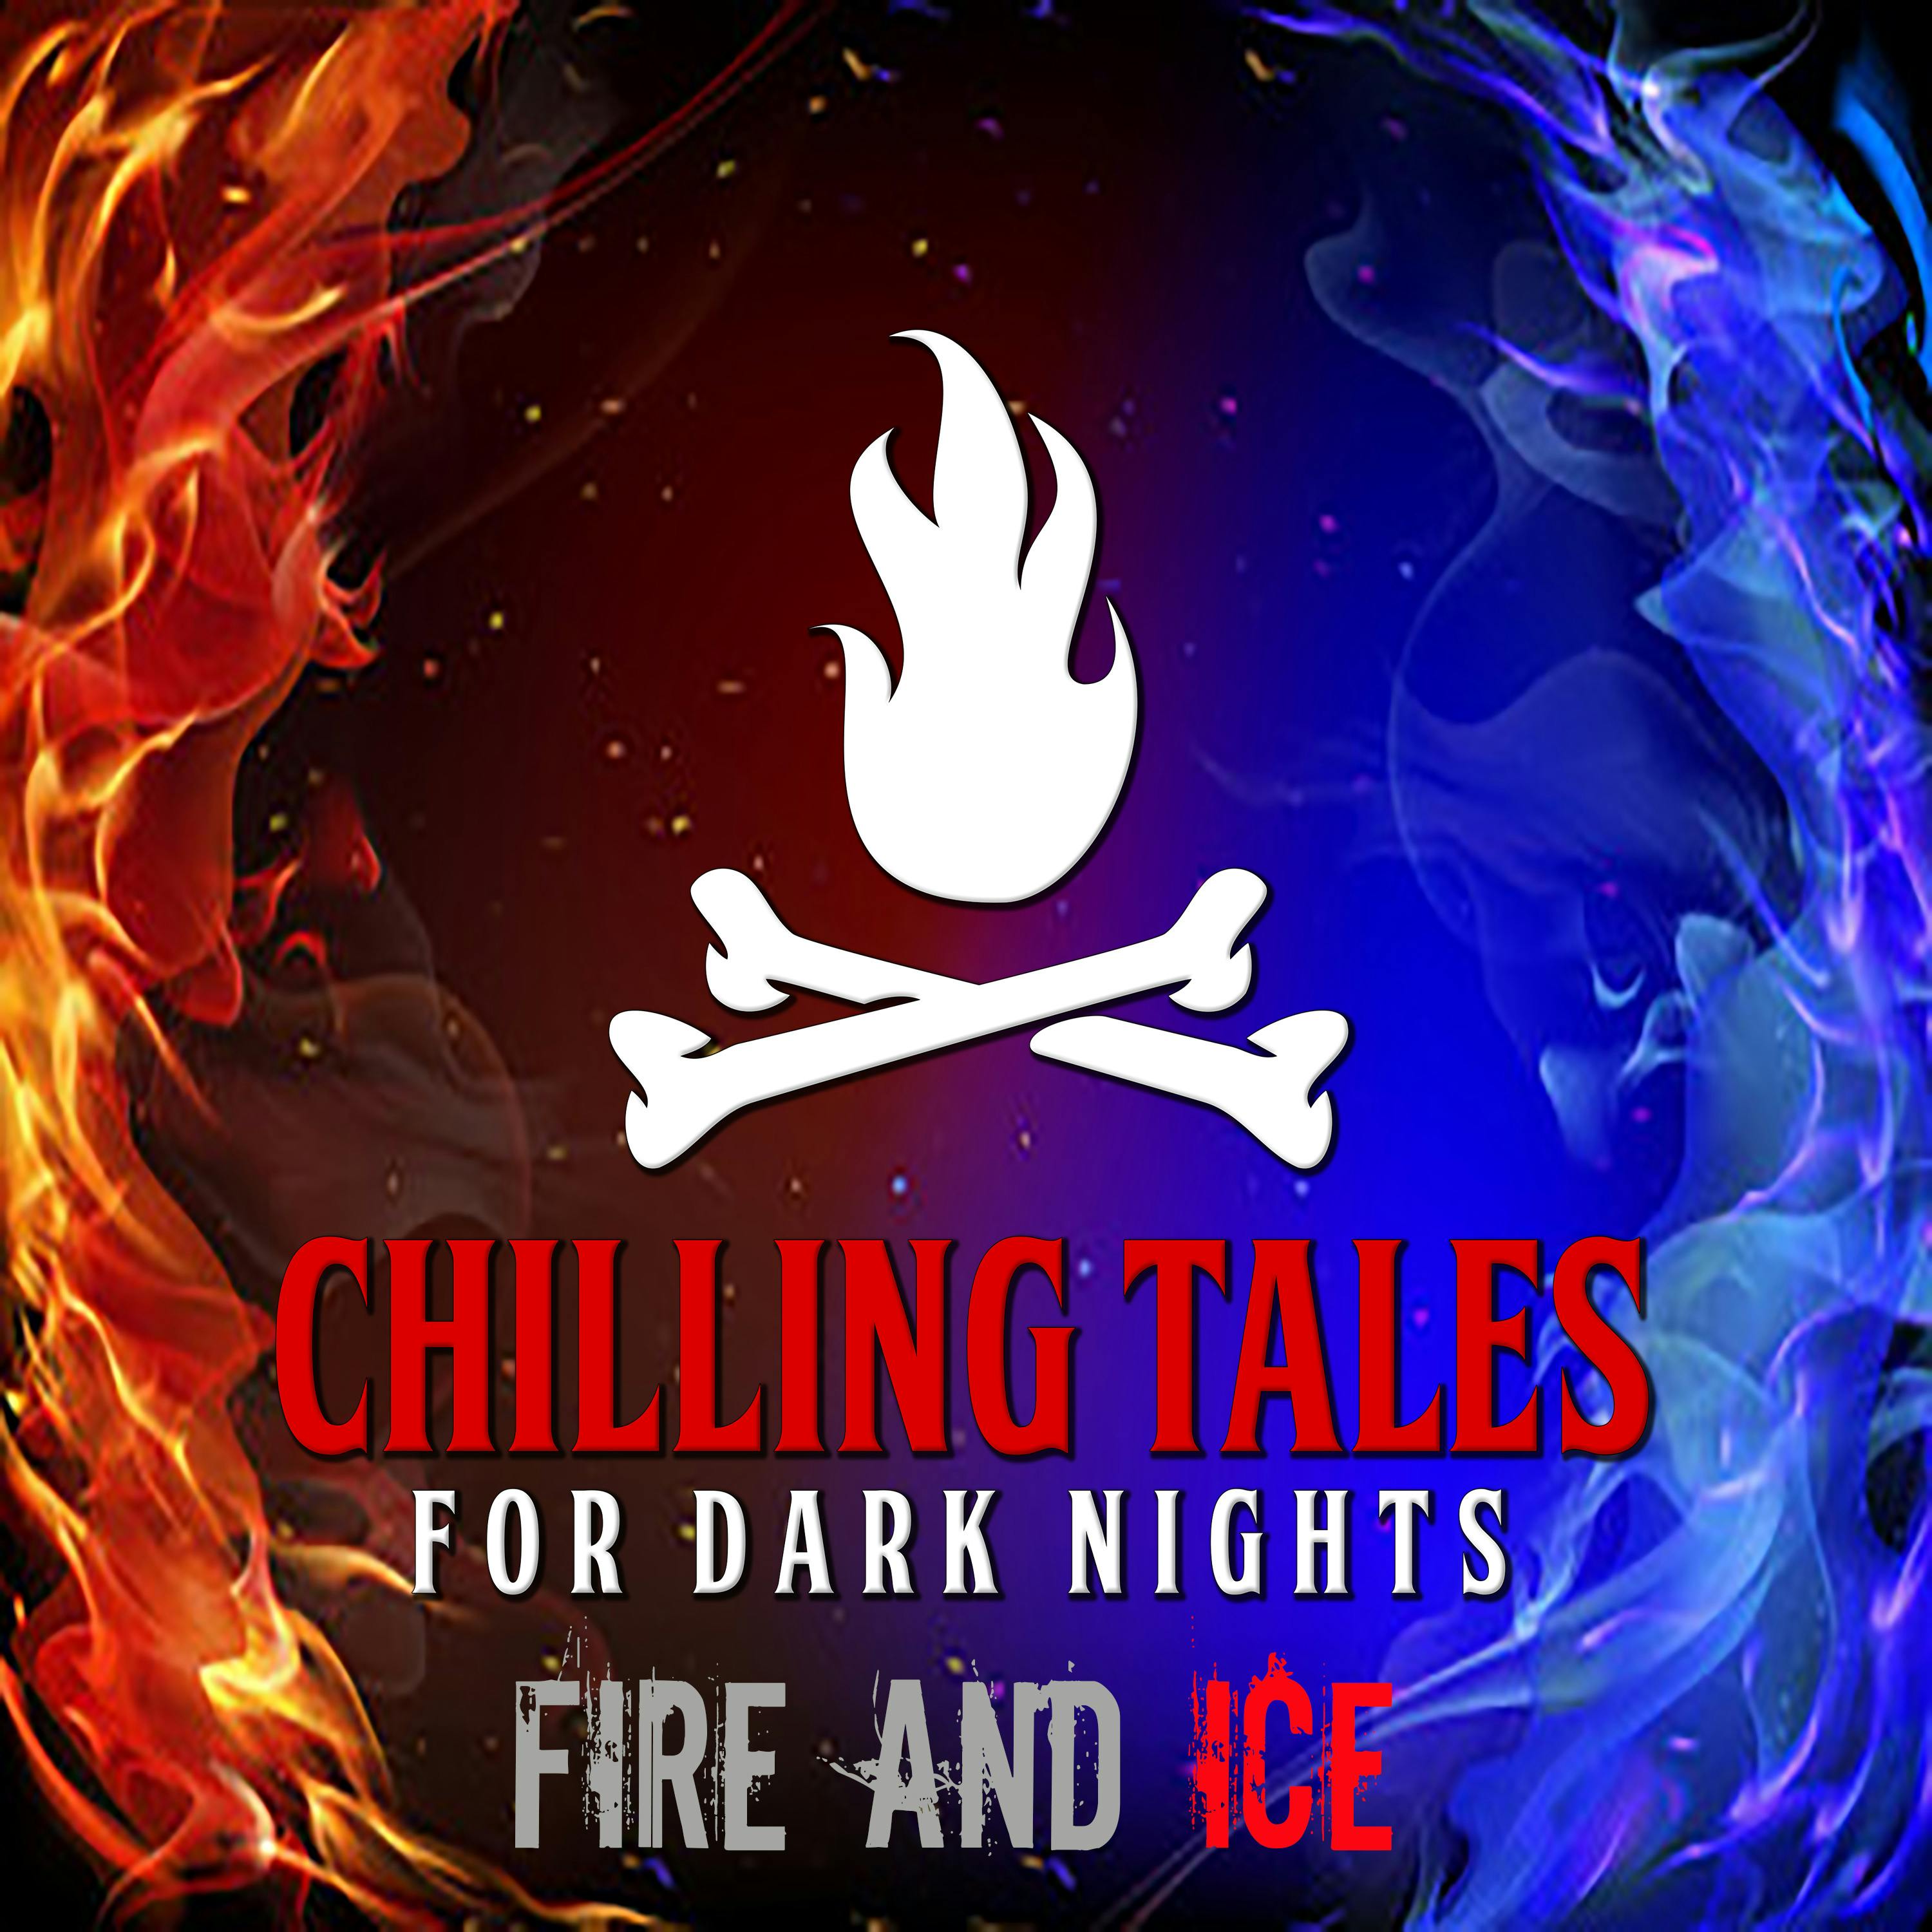 173: Fire and Ice - Chilling Tales for Dark Nights